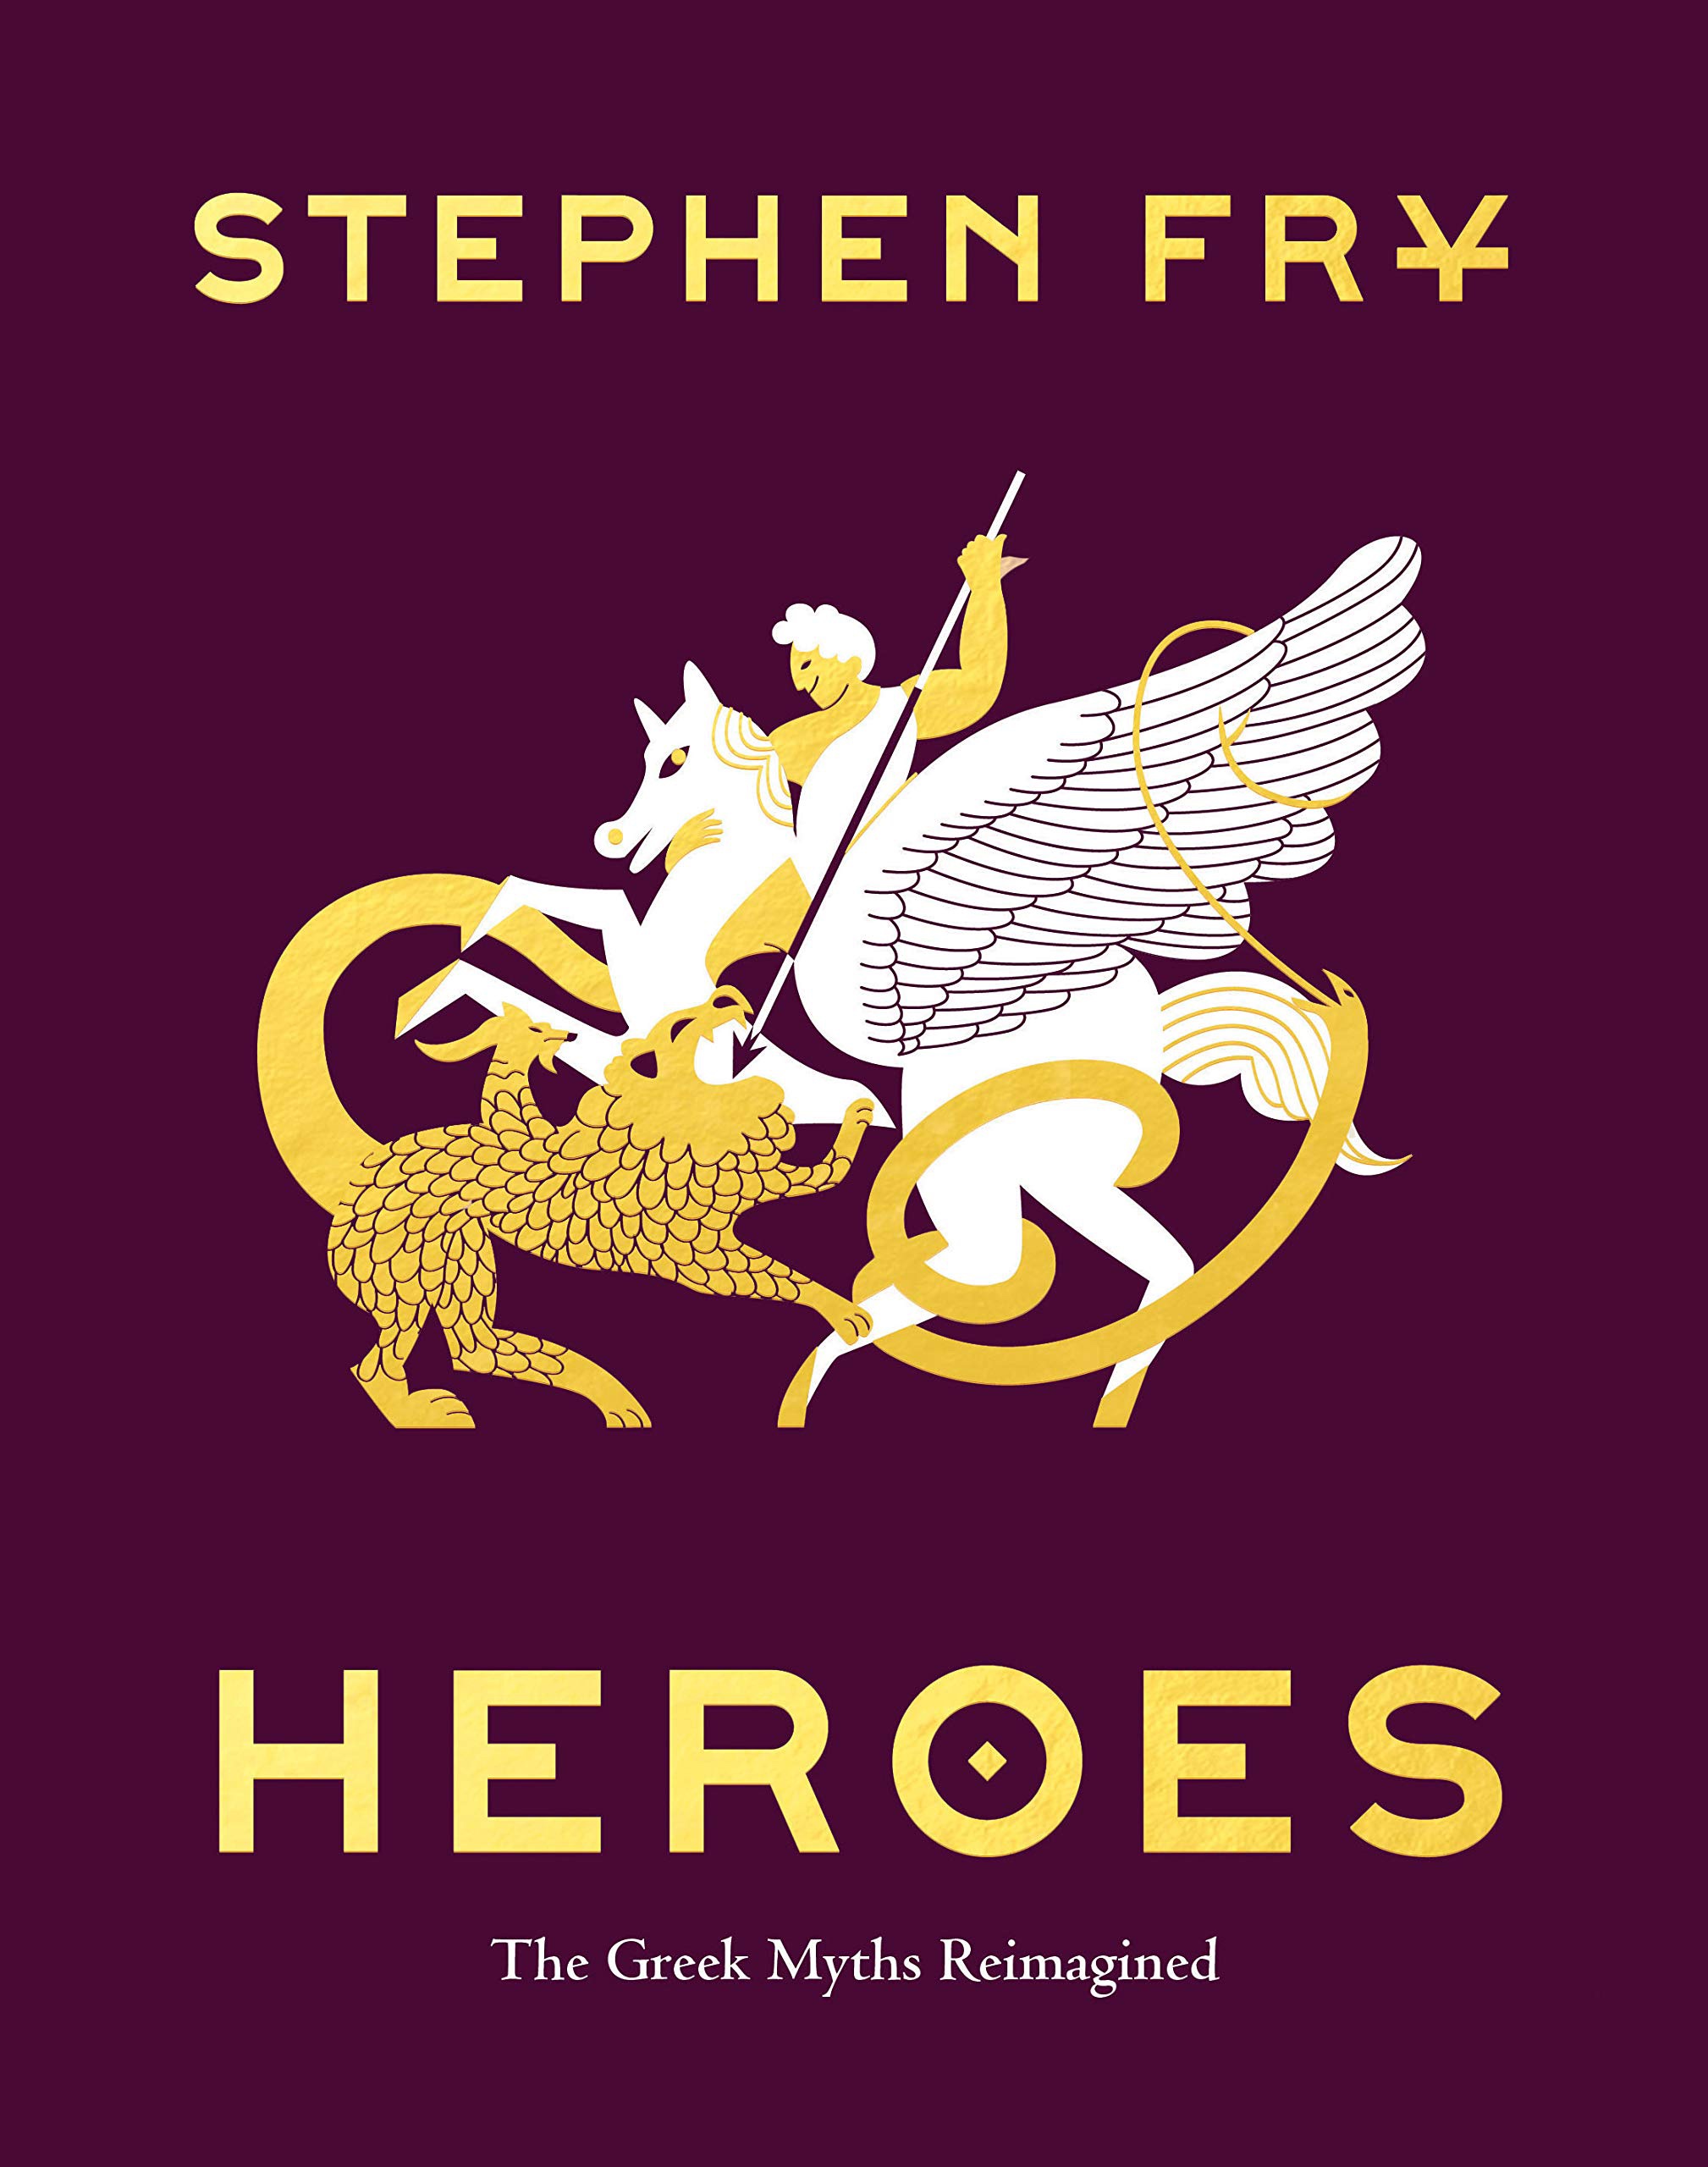 book review heroes stephen fry